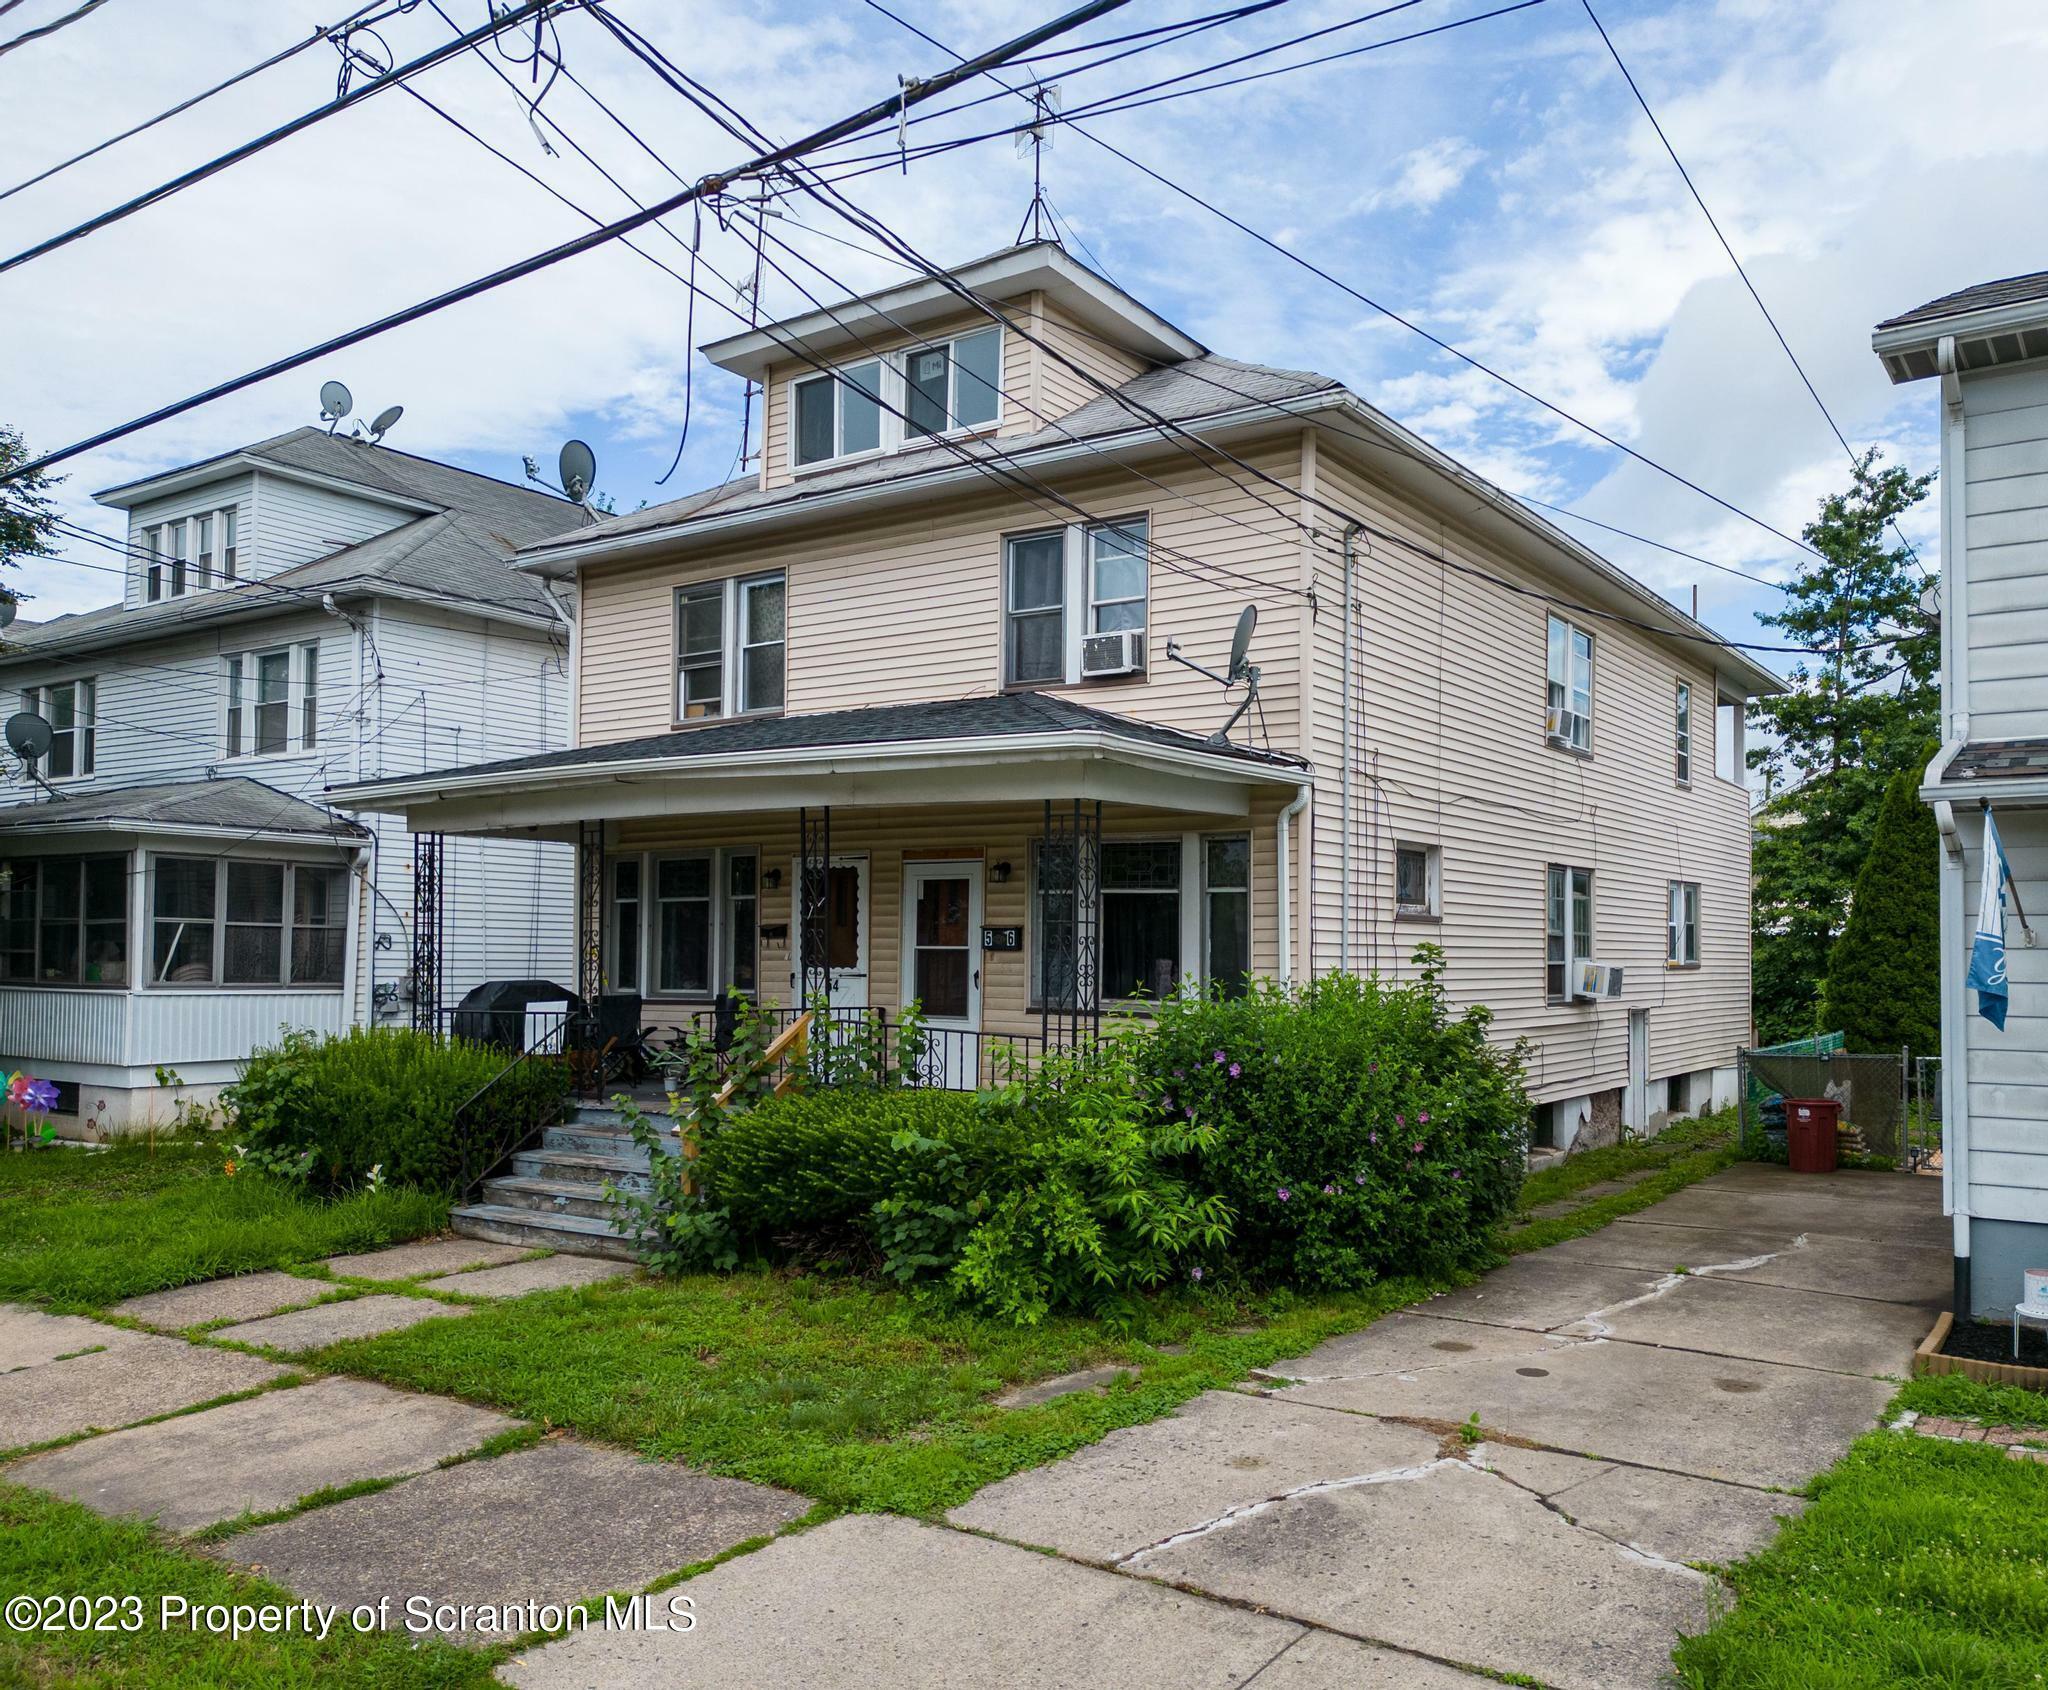 Property Photo:  54 - 56 N Welles Ave.  PA 18704 